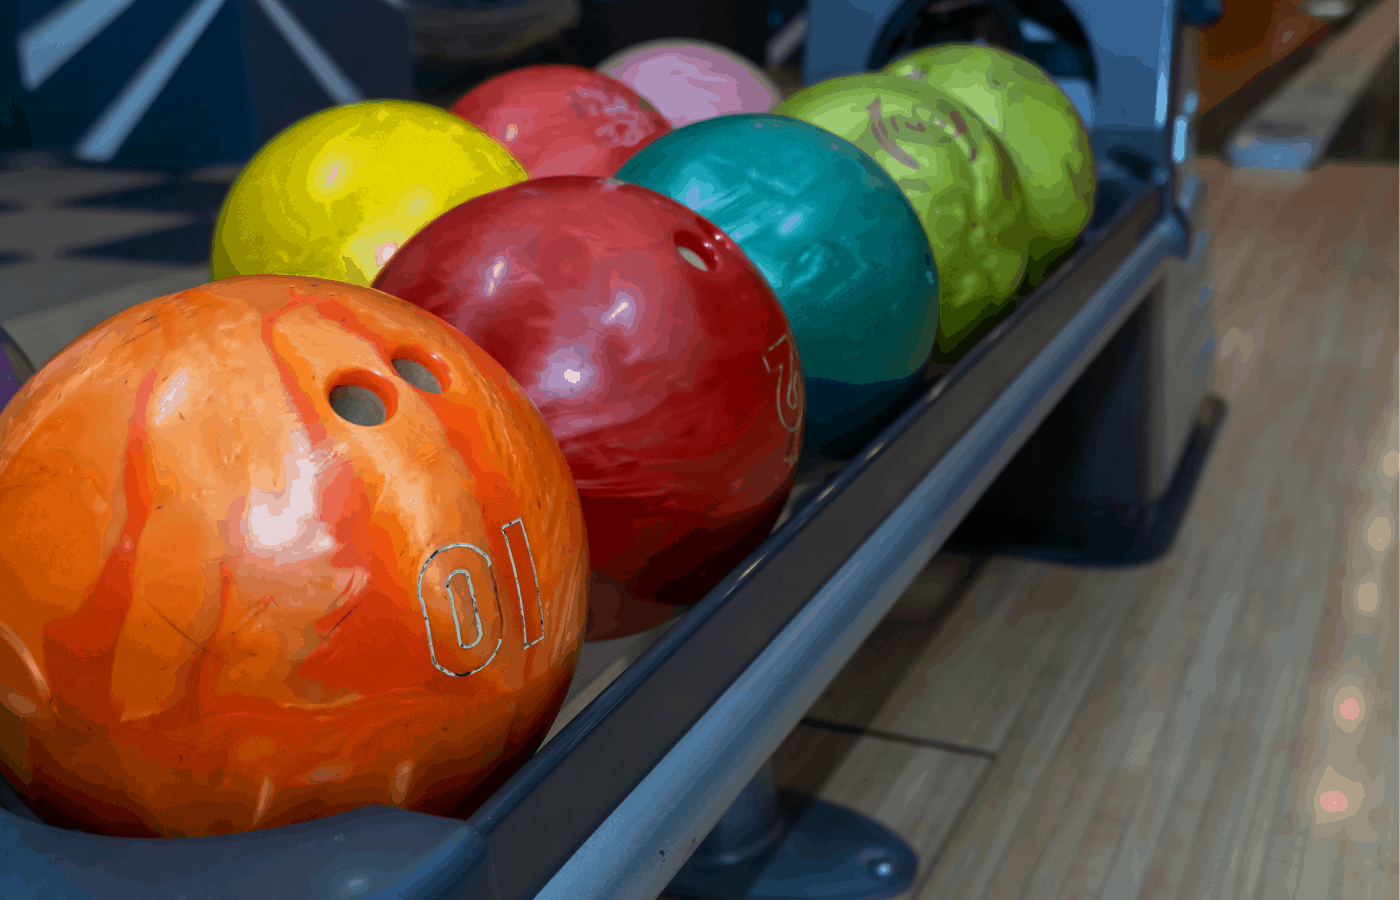 how heavy or light can a bowling ball be